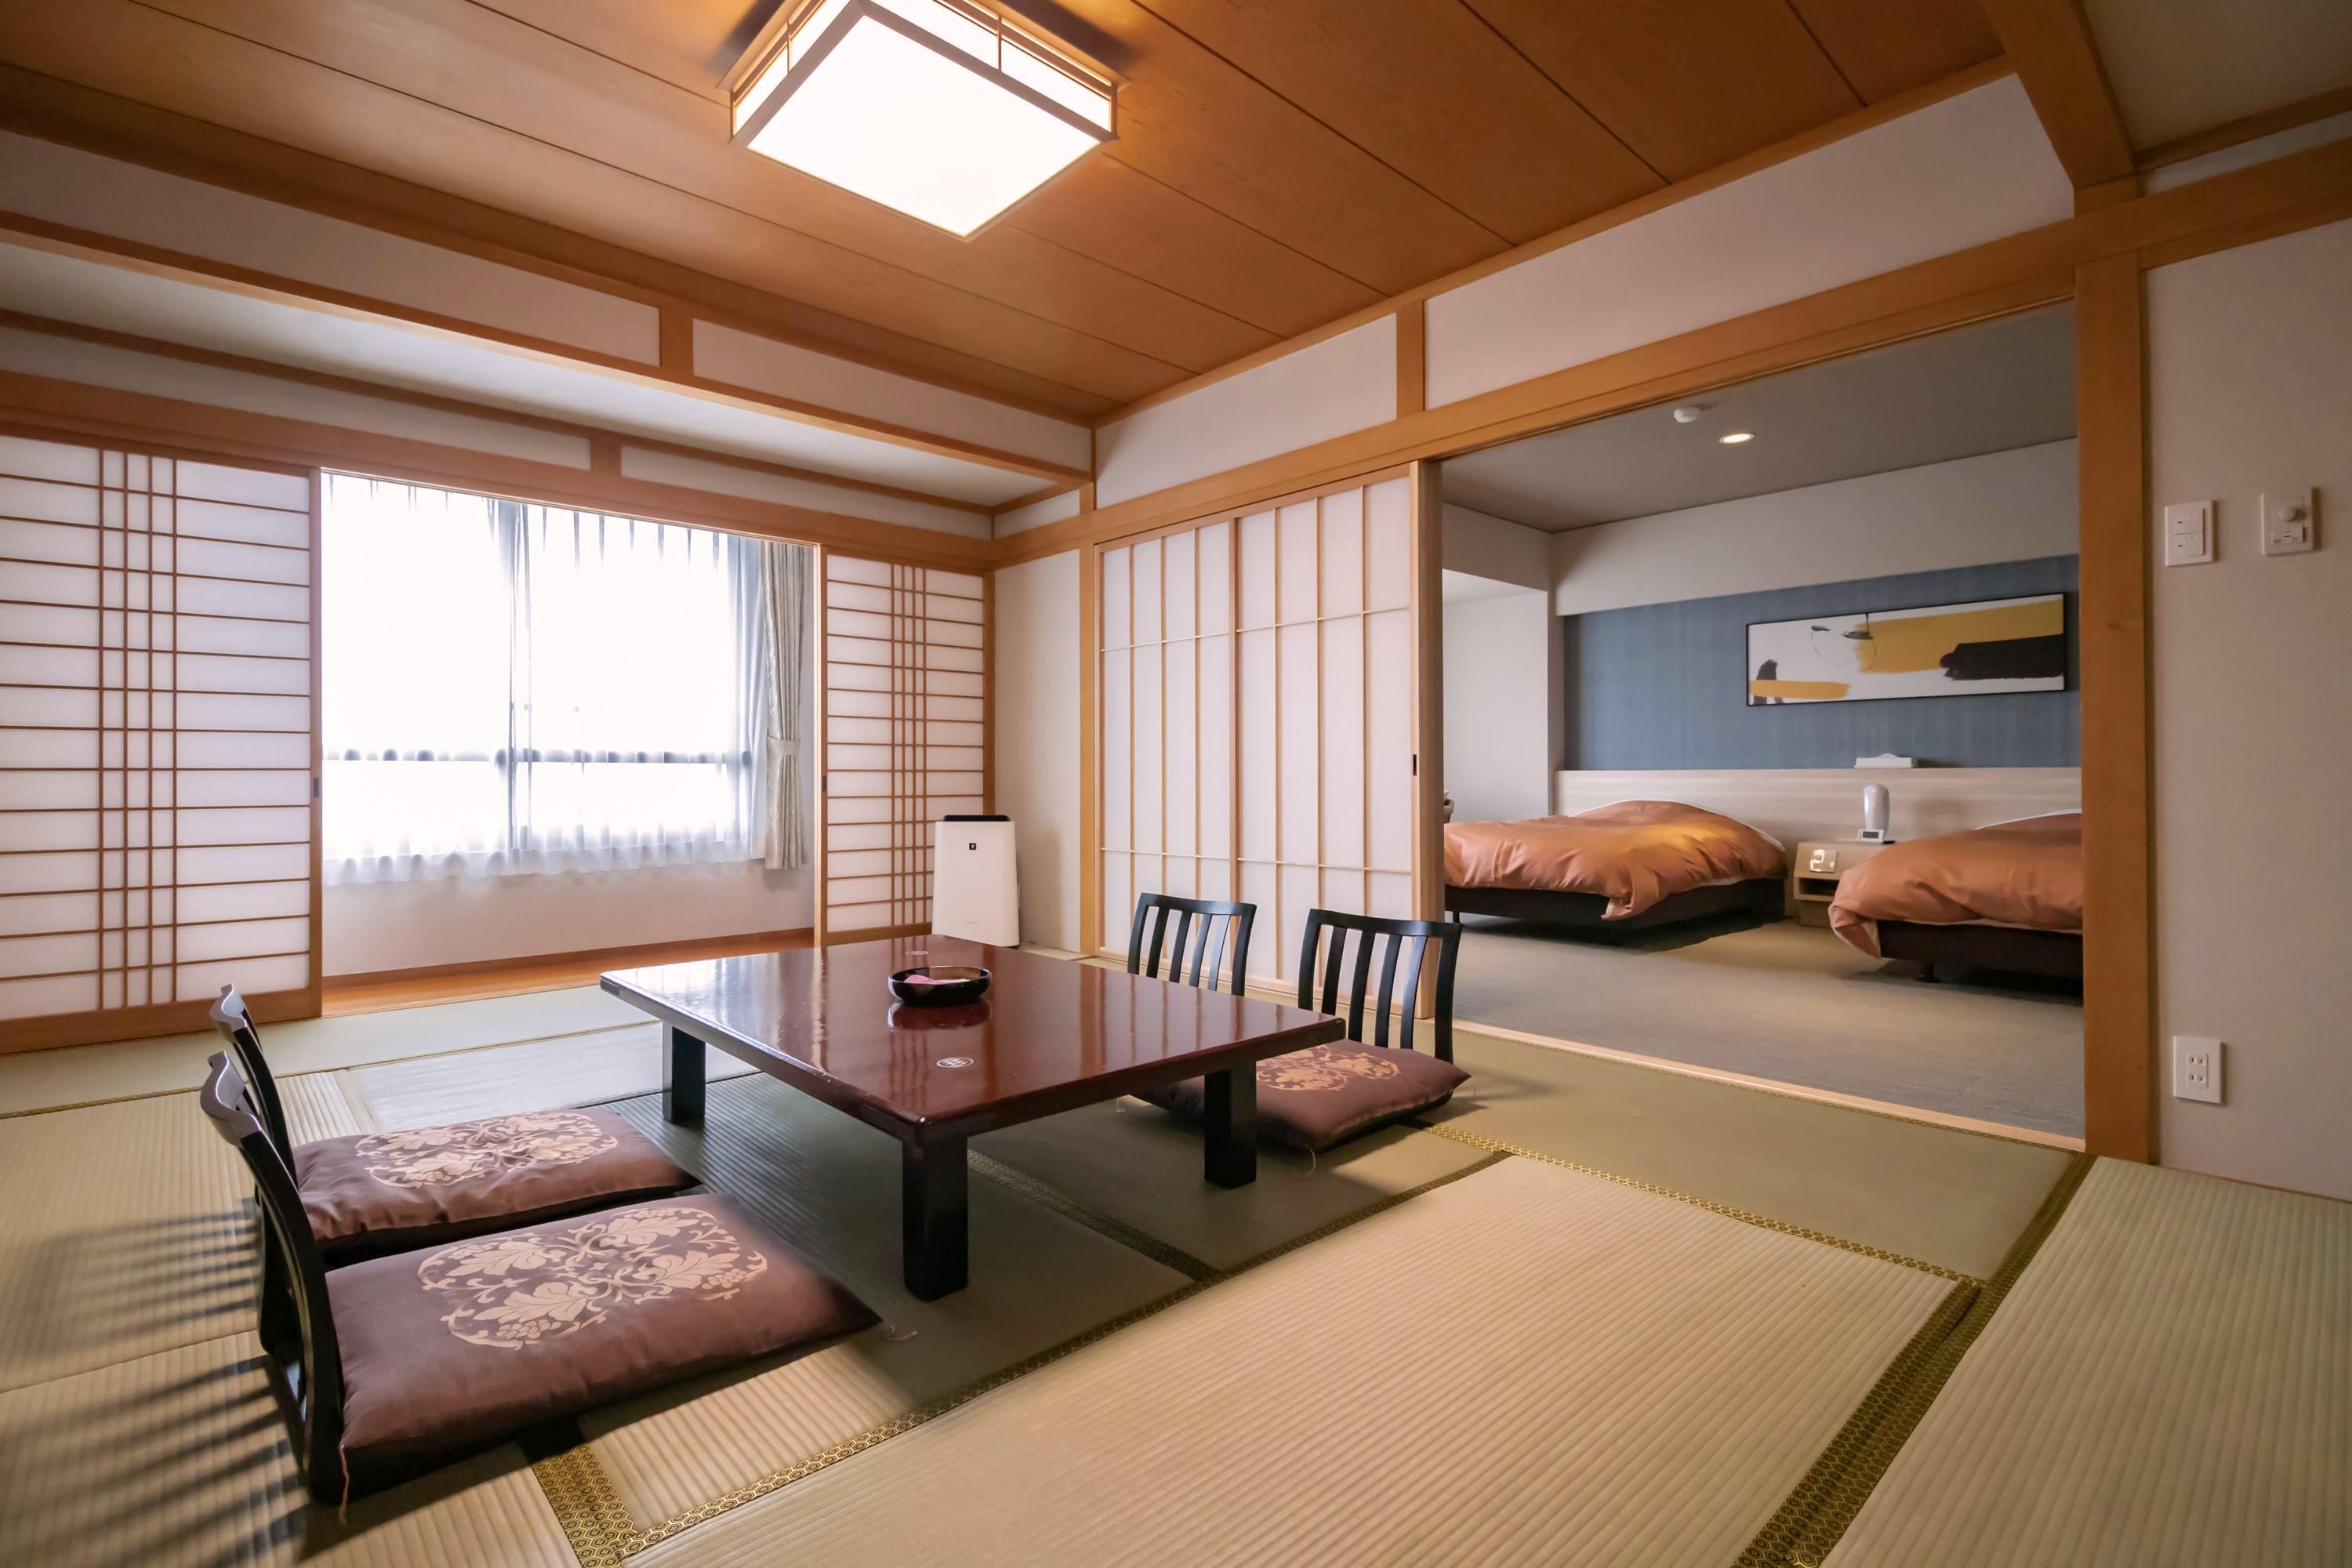 An example of a deluxe type Japanese-Western style room in the east building